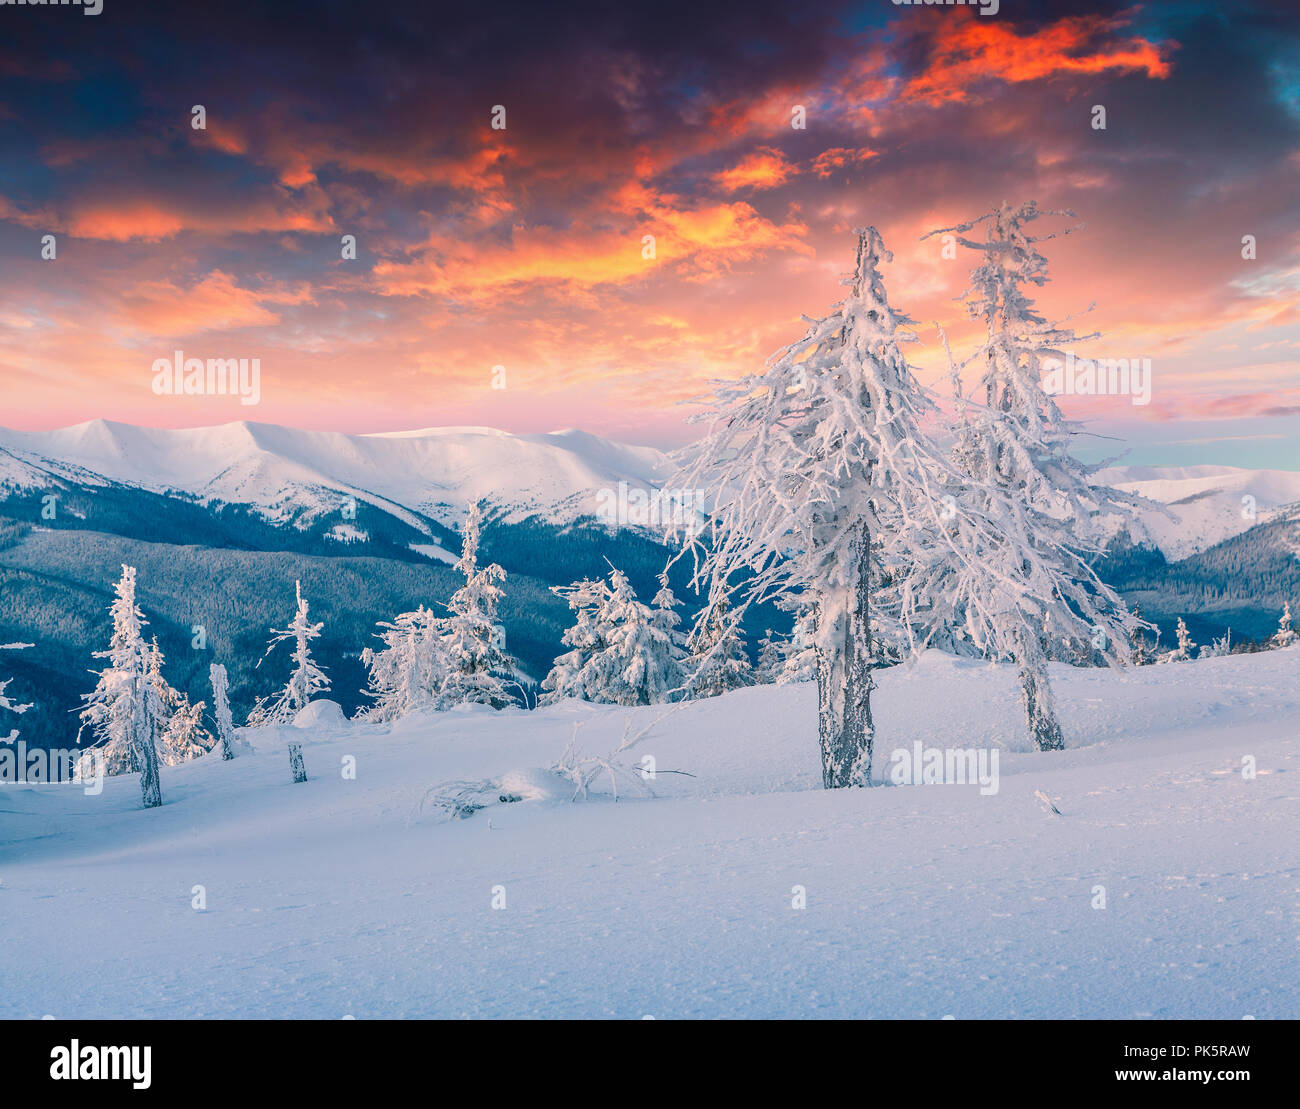 Colorful winter scene in the snowy mountains. Fresh snow at frosty morning glowing first sunlight. Instagram toning. Stock Photo